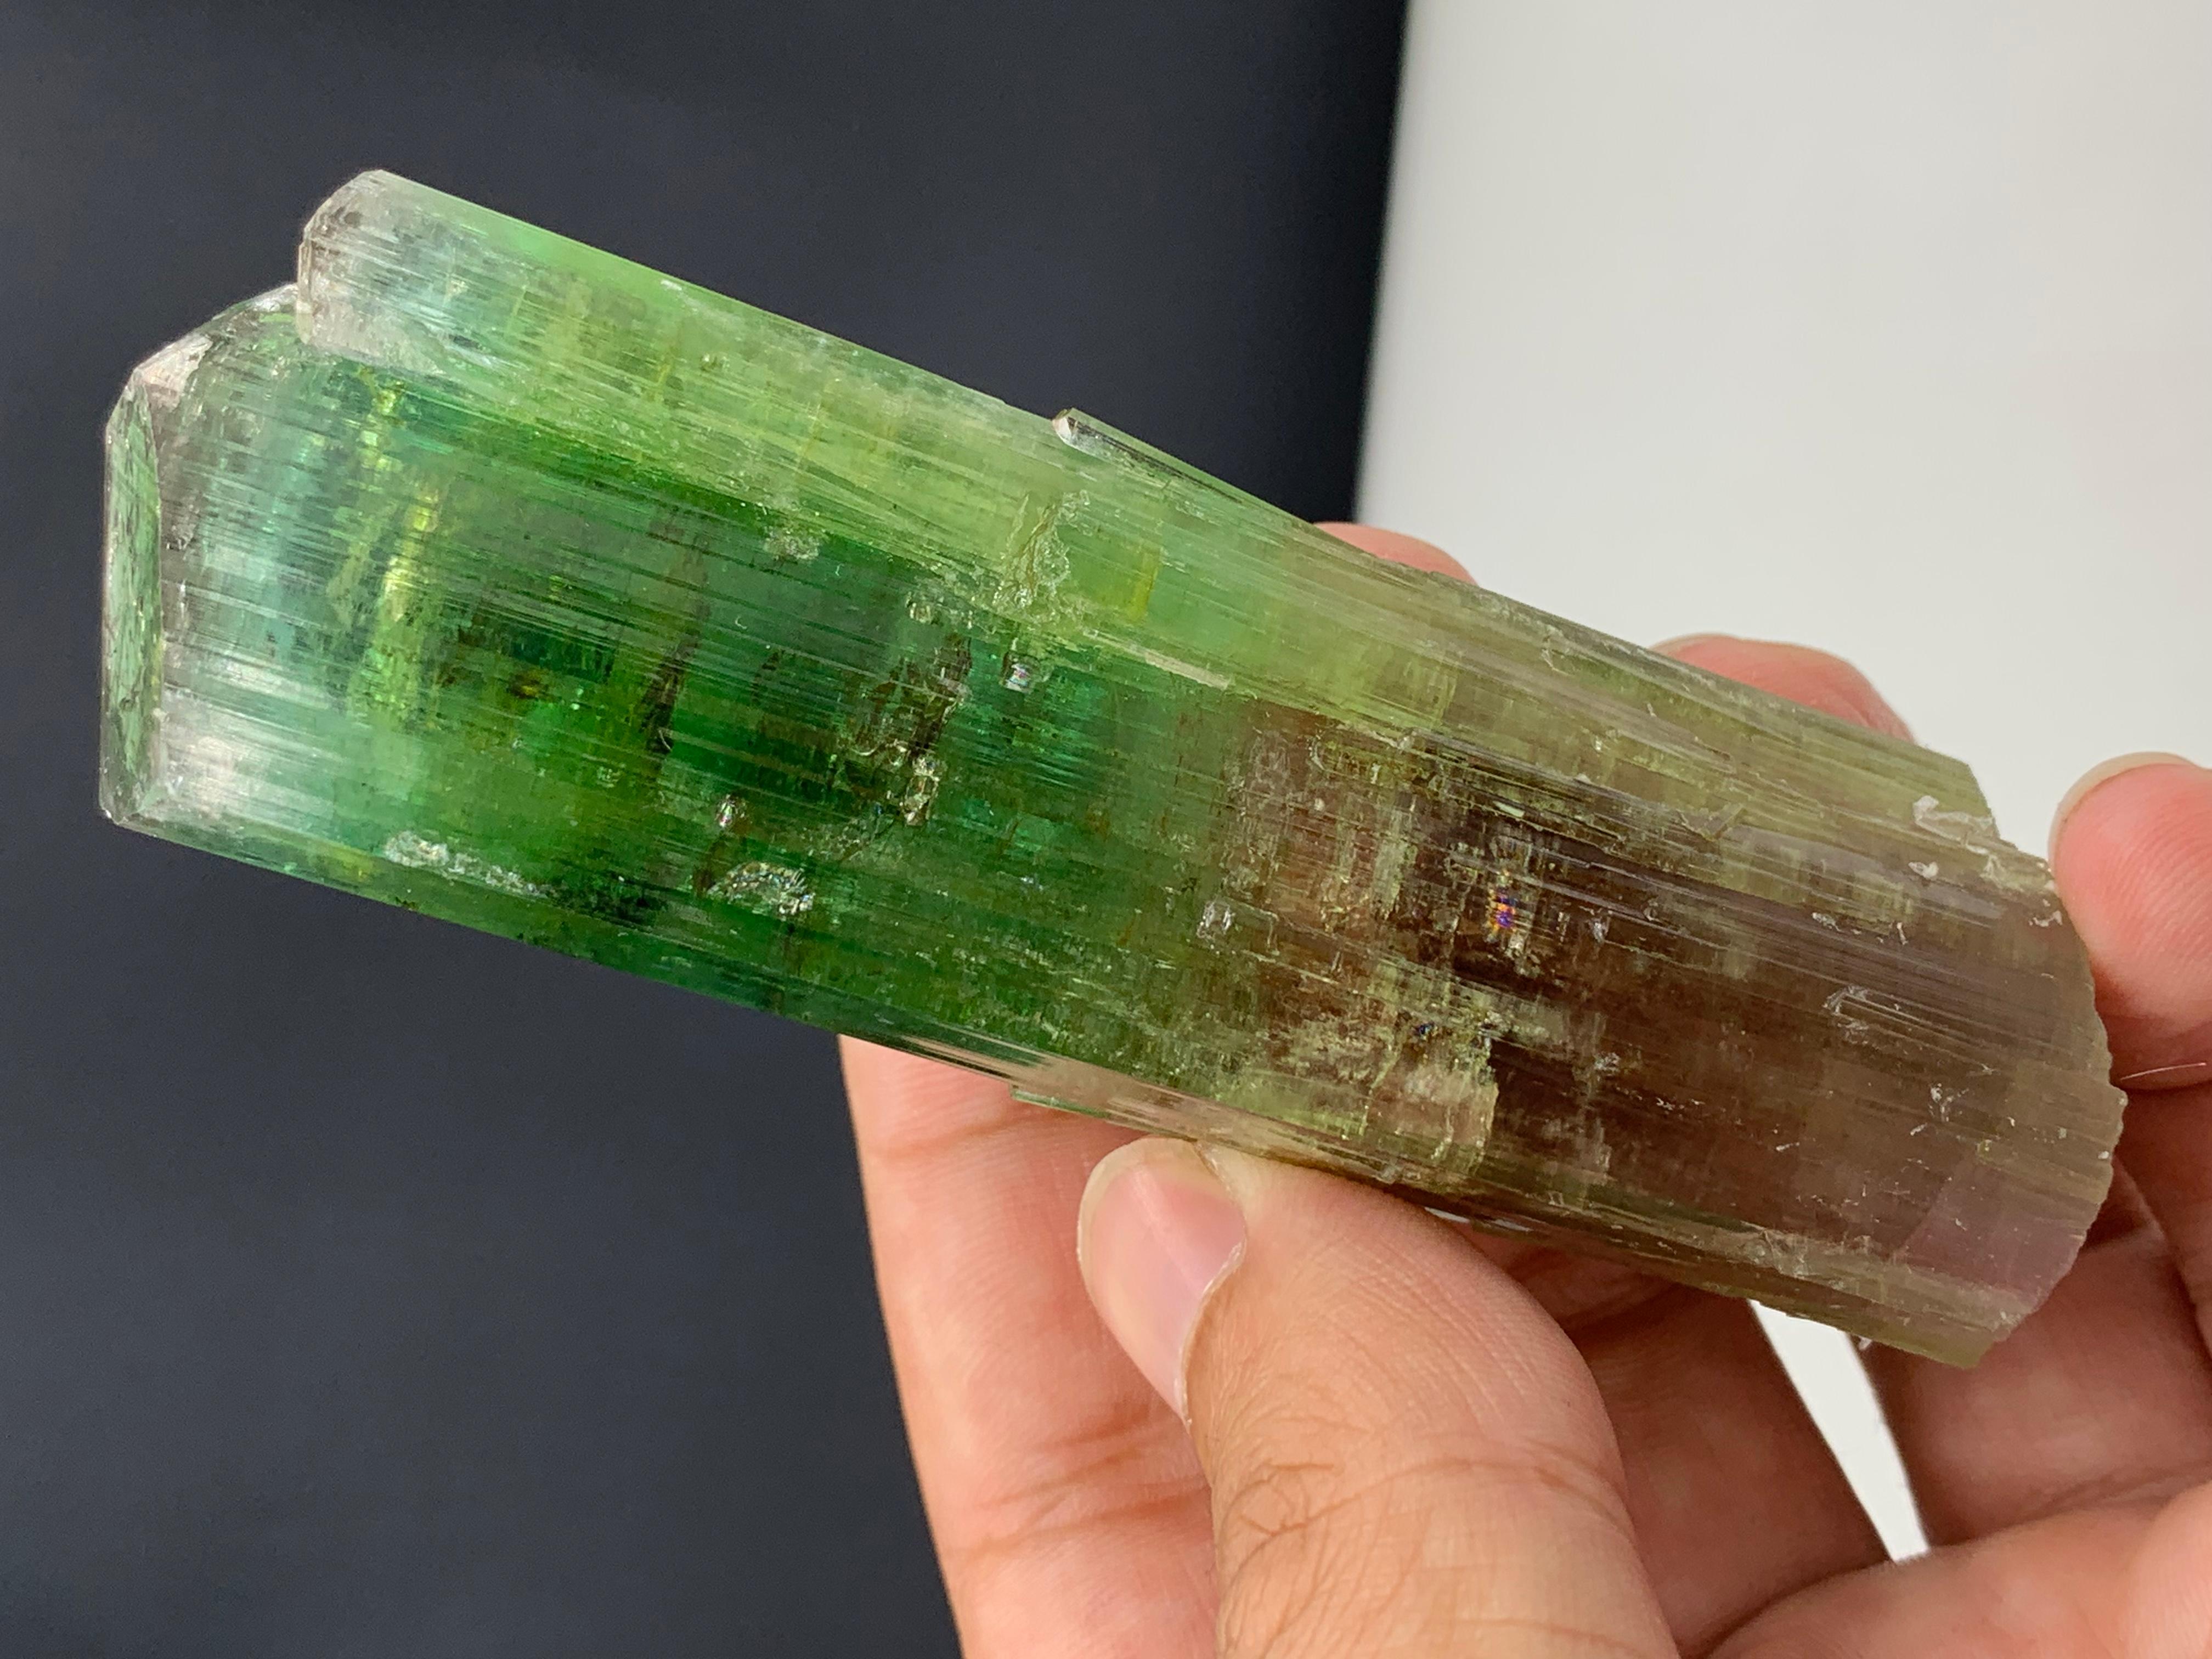 Lovely Bi Color Tourmaline Crystal From Afghanistan 
Weight: 137.10 Gram 
Dim: 9.6 x 3.2 x 2.3 Cm 
Color : Green and Peach 
Origin : Afghanistan 

Tourmaline is a crystalline silicate mineral group in which boron is compounded with elements